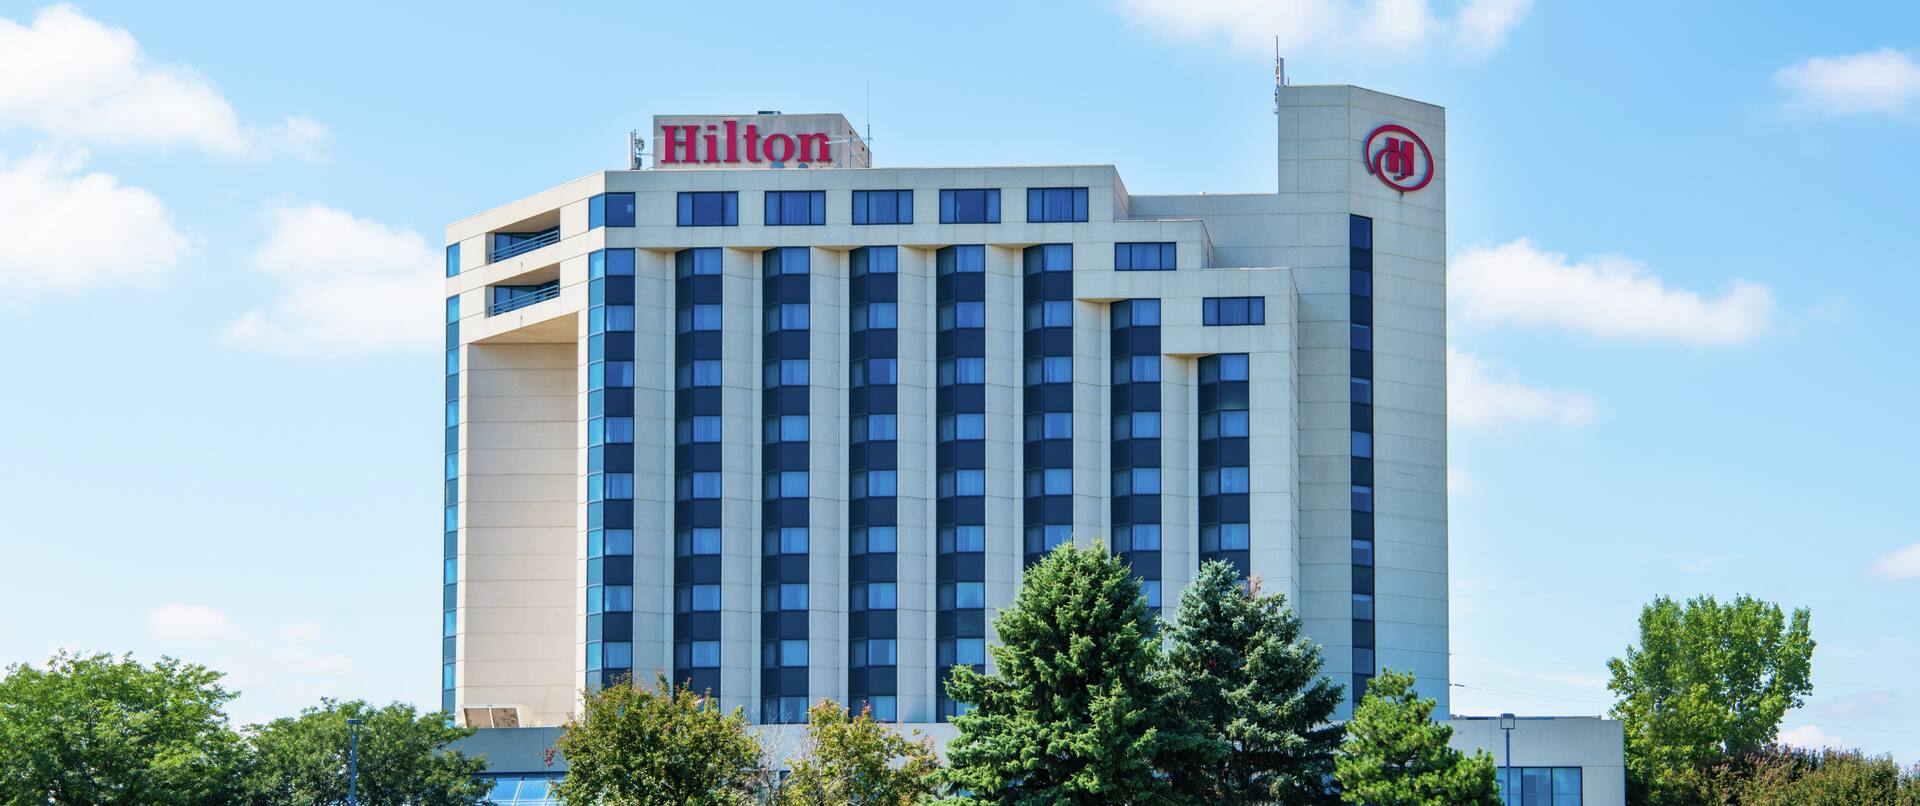 Front View of Hilton Hotel Exterior